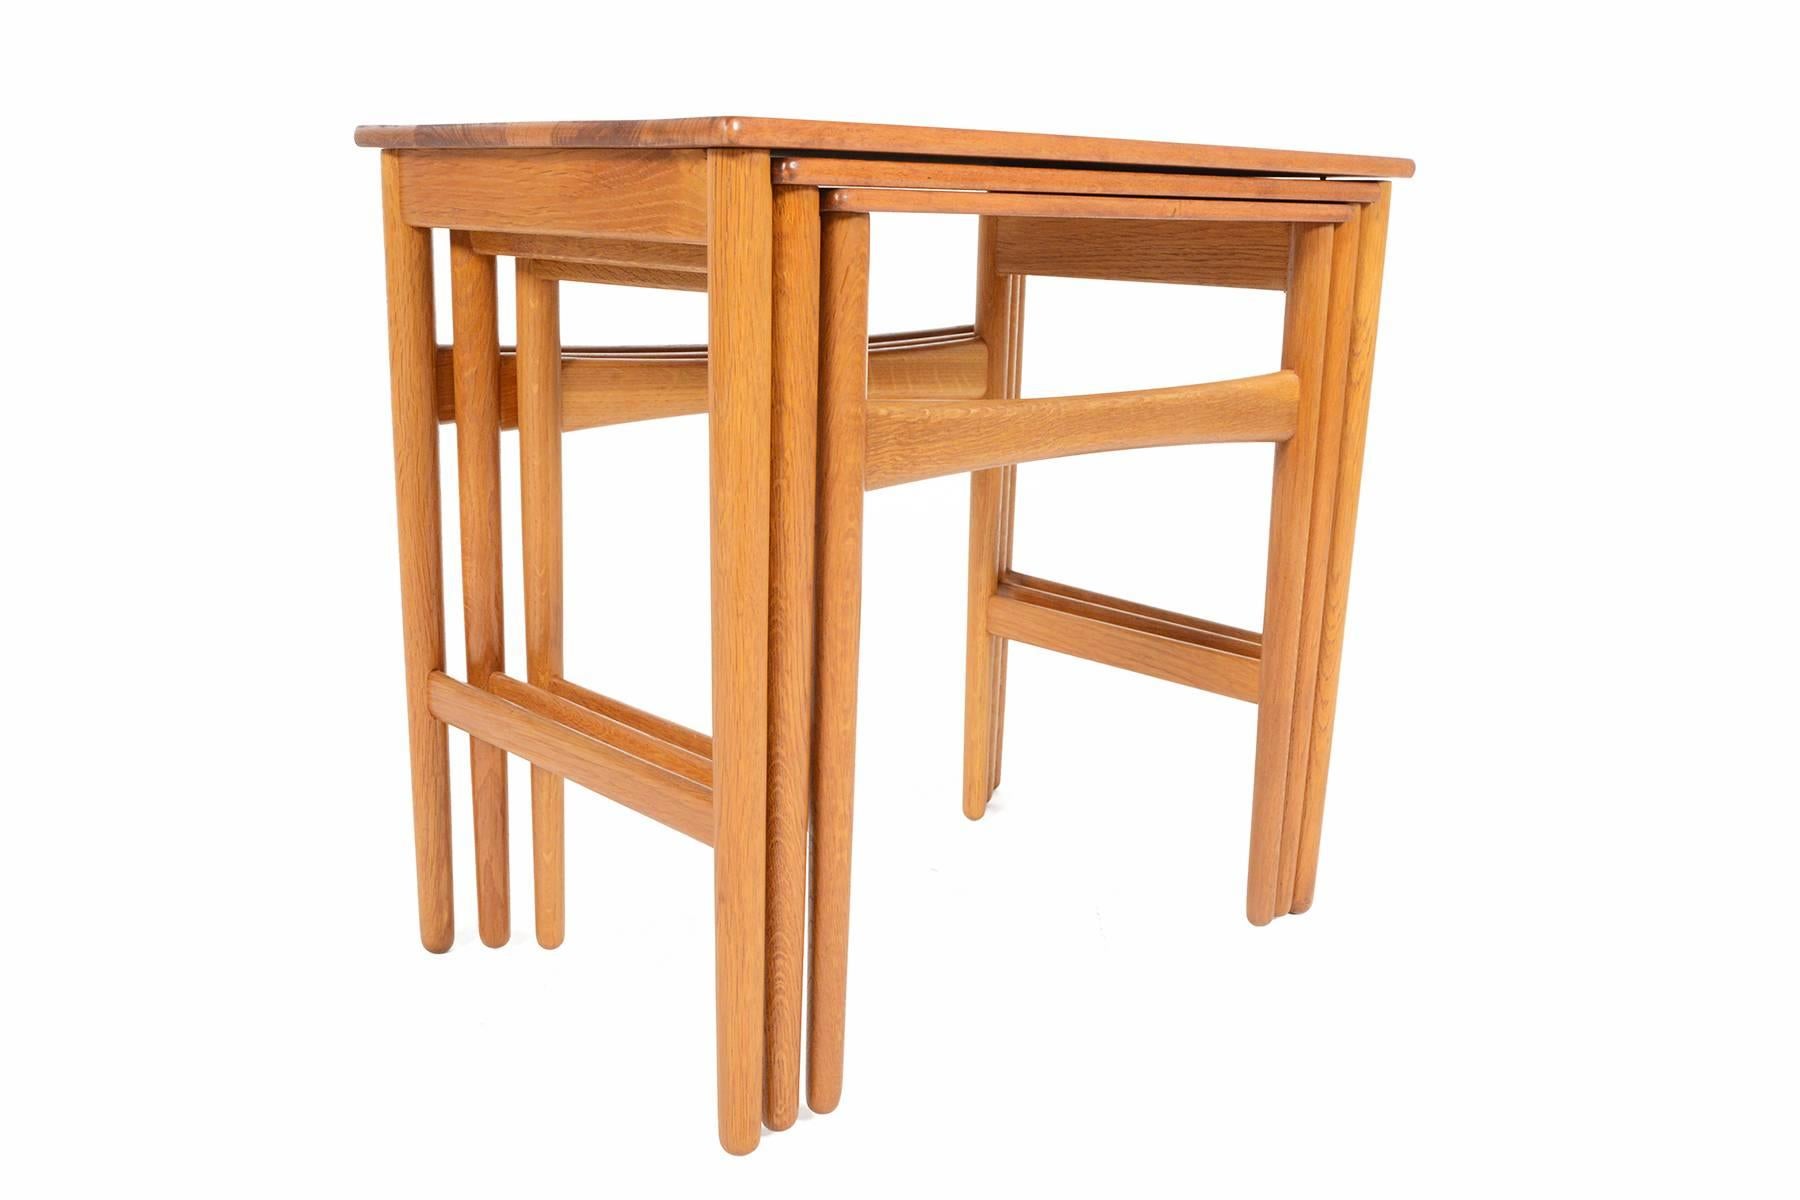 This set of absolutely gorgeous Danish modern nesting tables in teak and oak was designed by Hans Wegner in the 1960s. With old growth, rich grain throughout the solid teak tops, these tables float delicately above braced oak legs. A fantastic